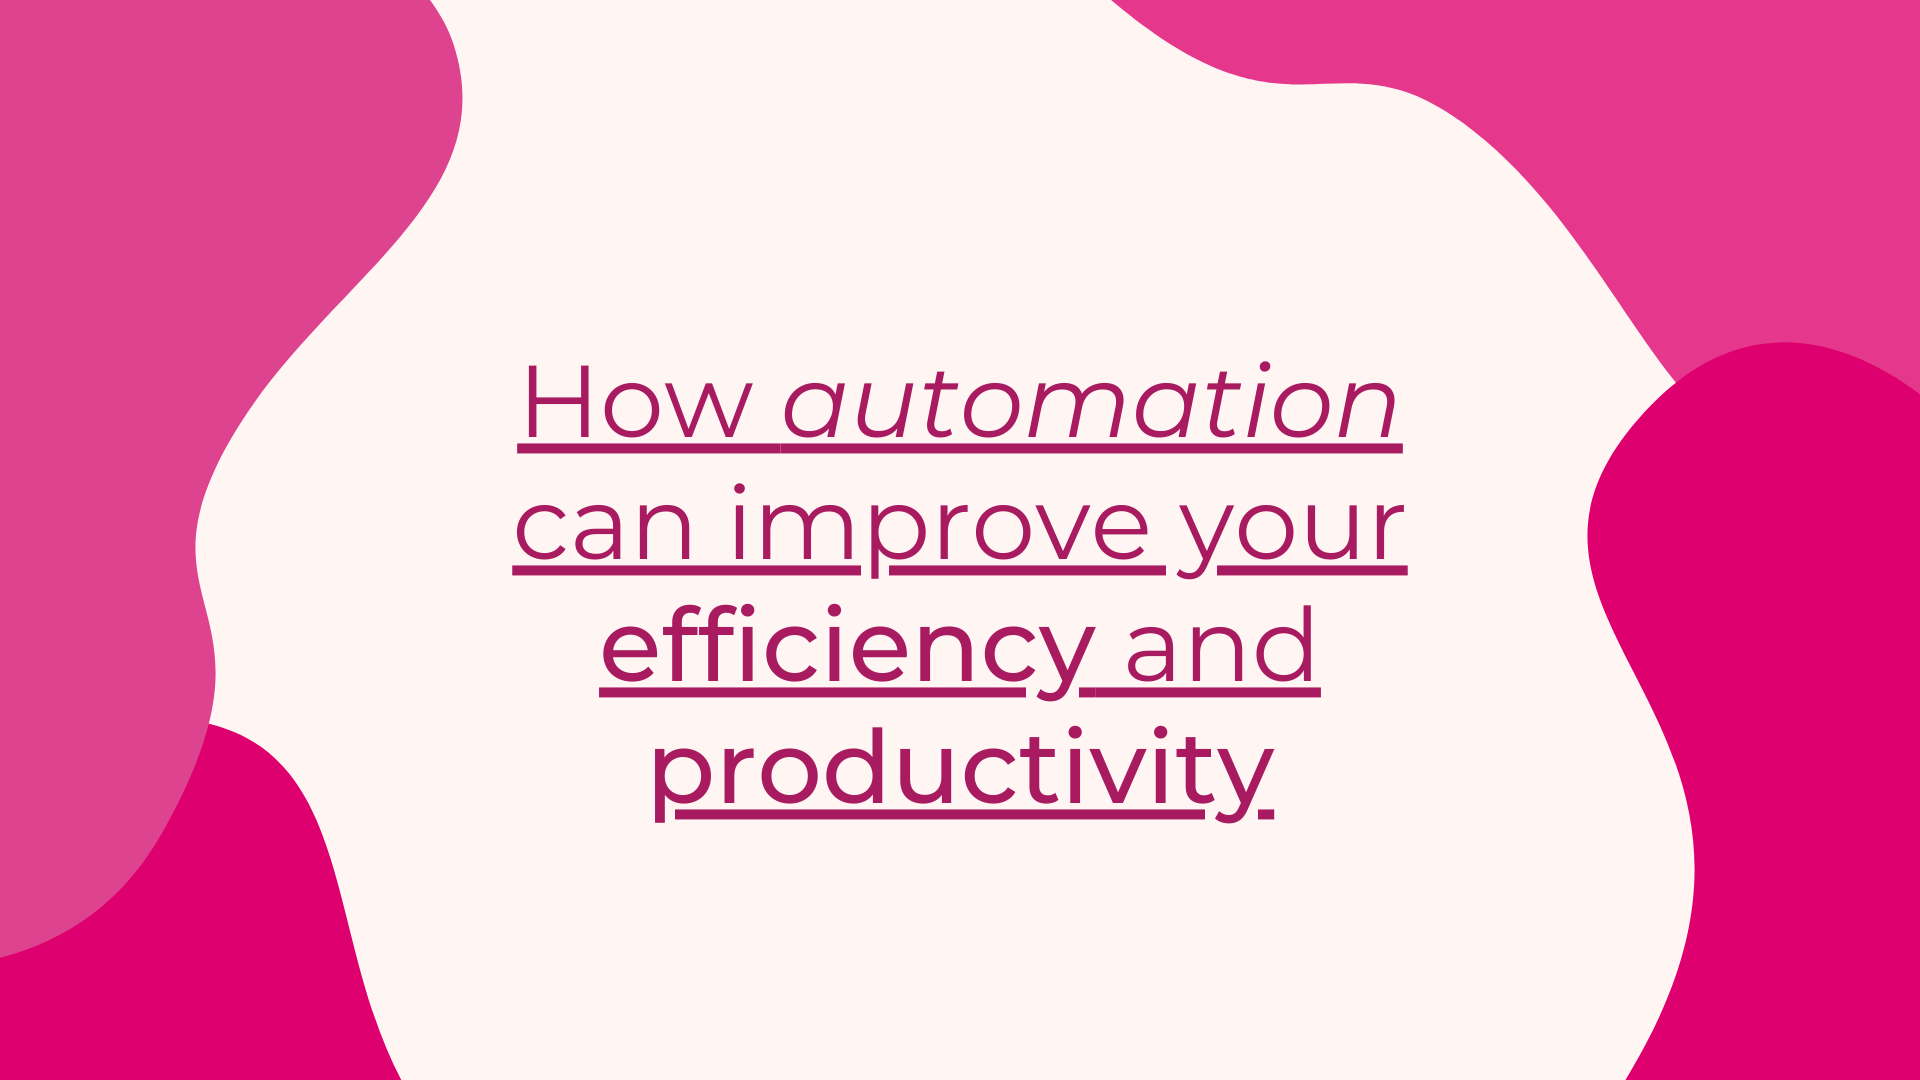 How automation can improve your efficiency and productivity